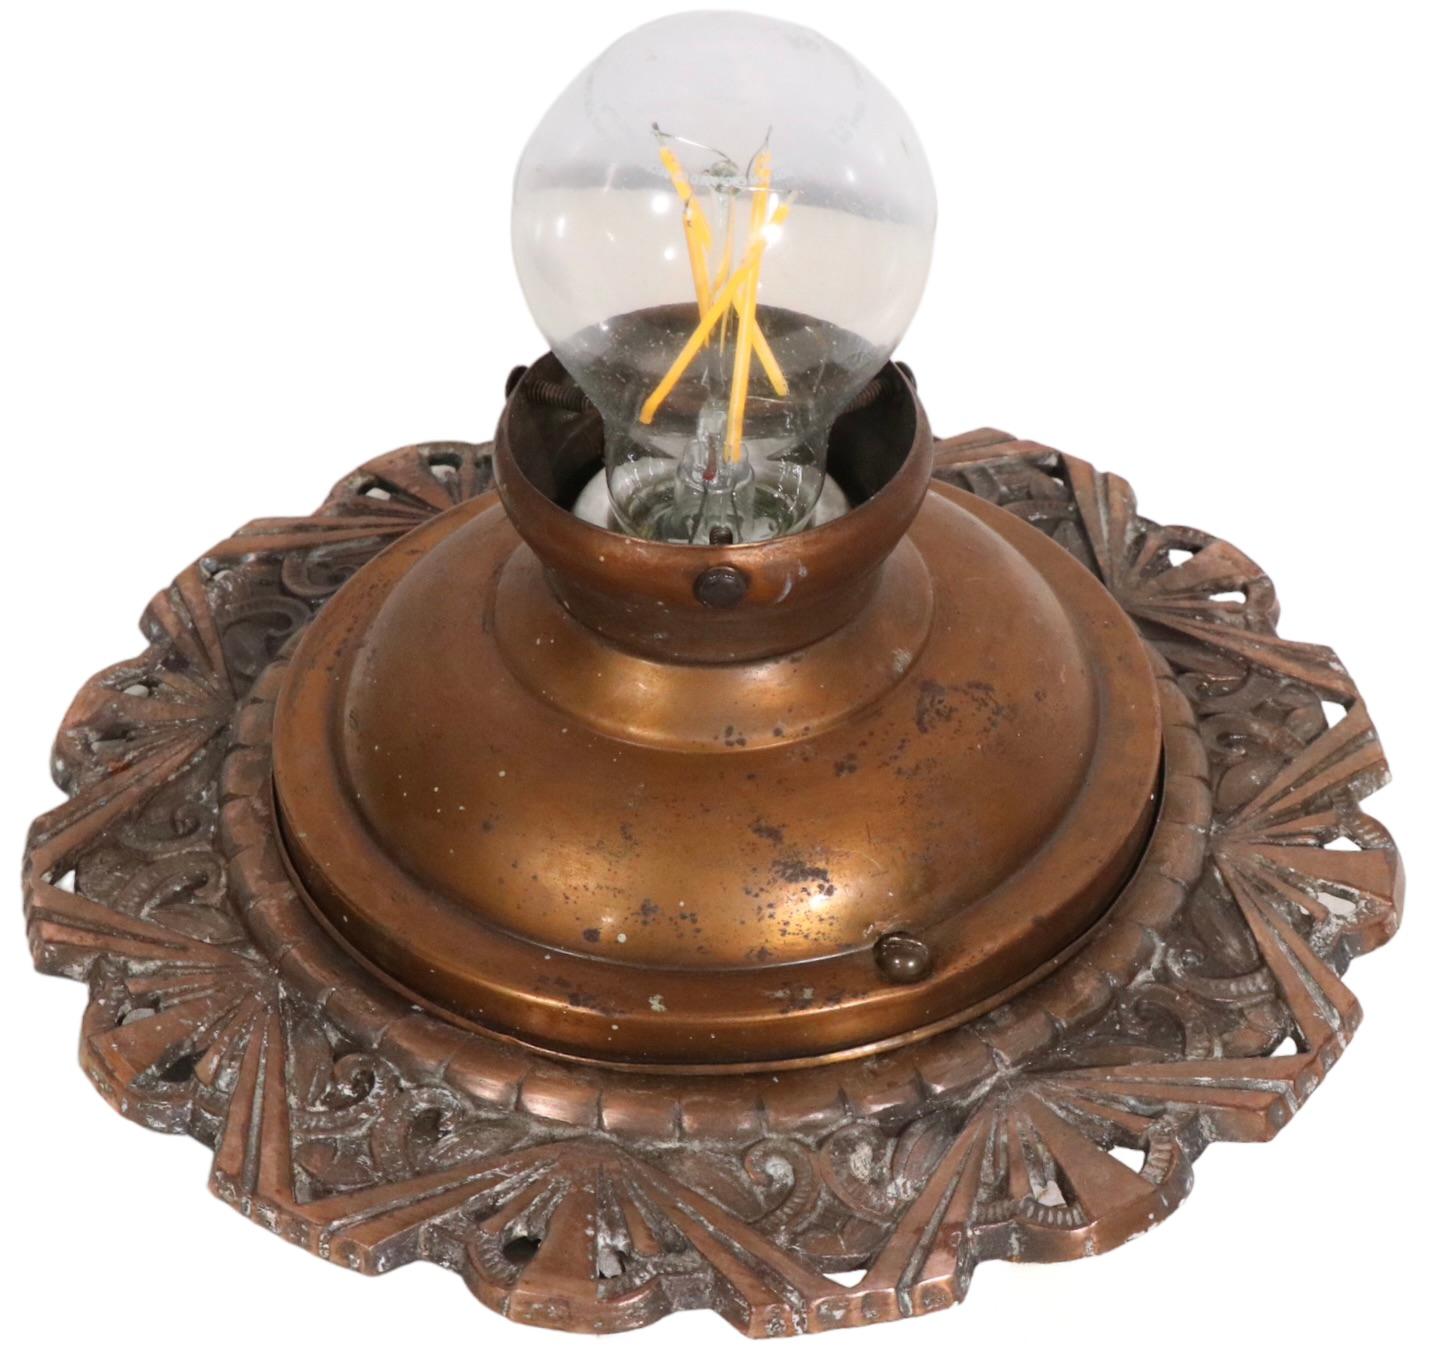 Art Deco flush mount fixture with decorative cast bronze ceiling mount and  period ruffled edge halothane shade. The fixture is in very good, clean, original and working condition, ready to install. Minor ceiling paint evident on the bronze